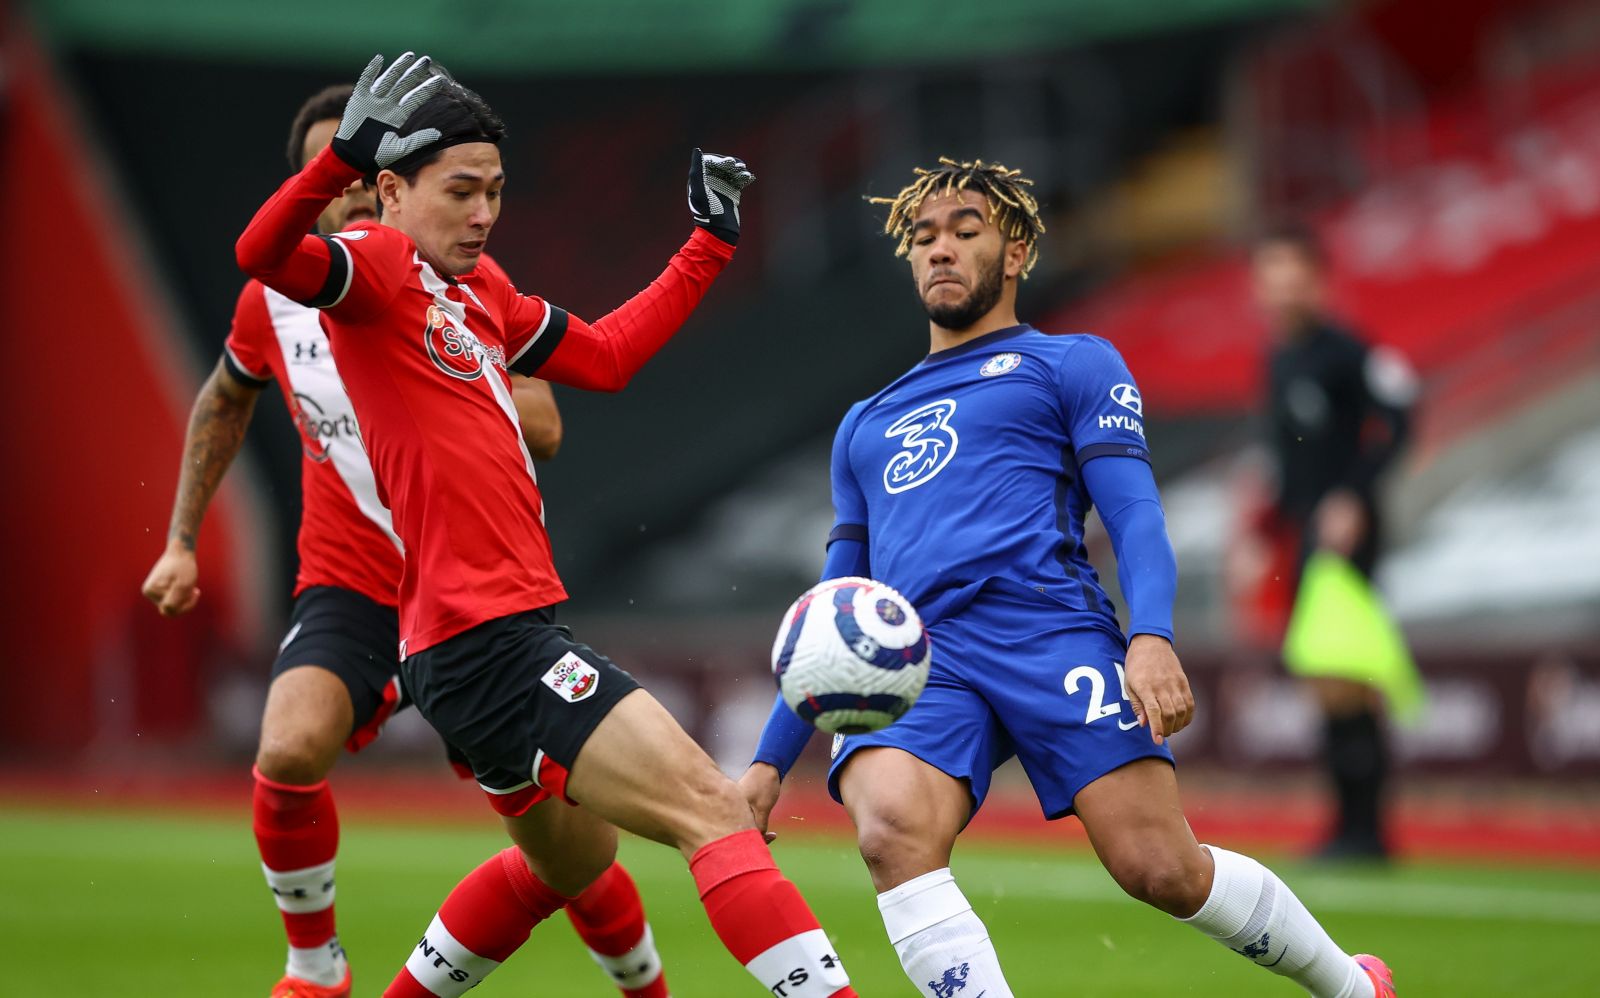 epa09025704 Takumi Minamino (L) of Southampton in action against Reece James (R) of Chelsea during the English Premier League soccer match between Southampton FC and Chelsea FC in Southampton, Britain, 20 February 2021.  EPA/Michael Steele / POOL EDITORIAL USE ONLY. No use with unauthorized audio, video, data, fixture lists, club/league logos or 'live' services. Online in-match use limited to 120 images, no video emulation. No use in betting, games or single club/league/player publications.